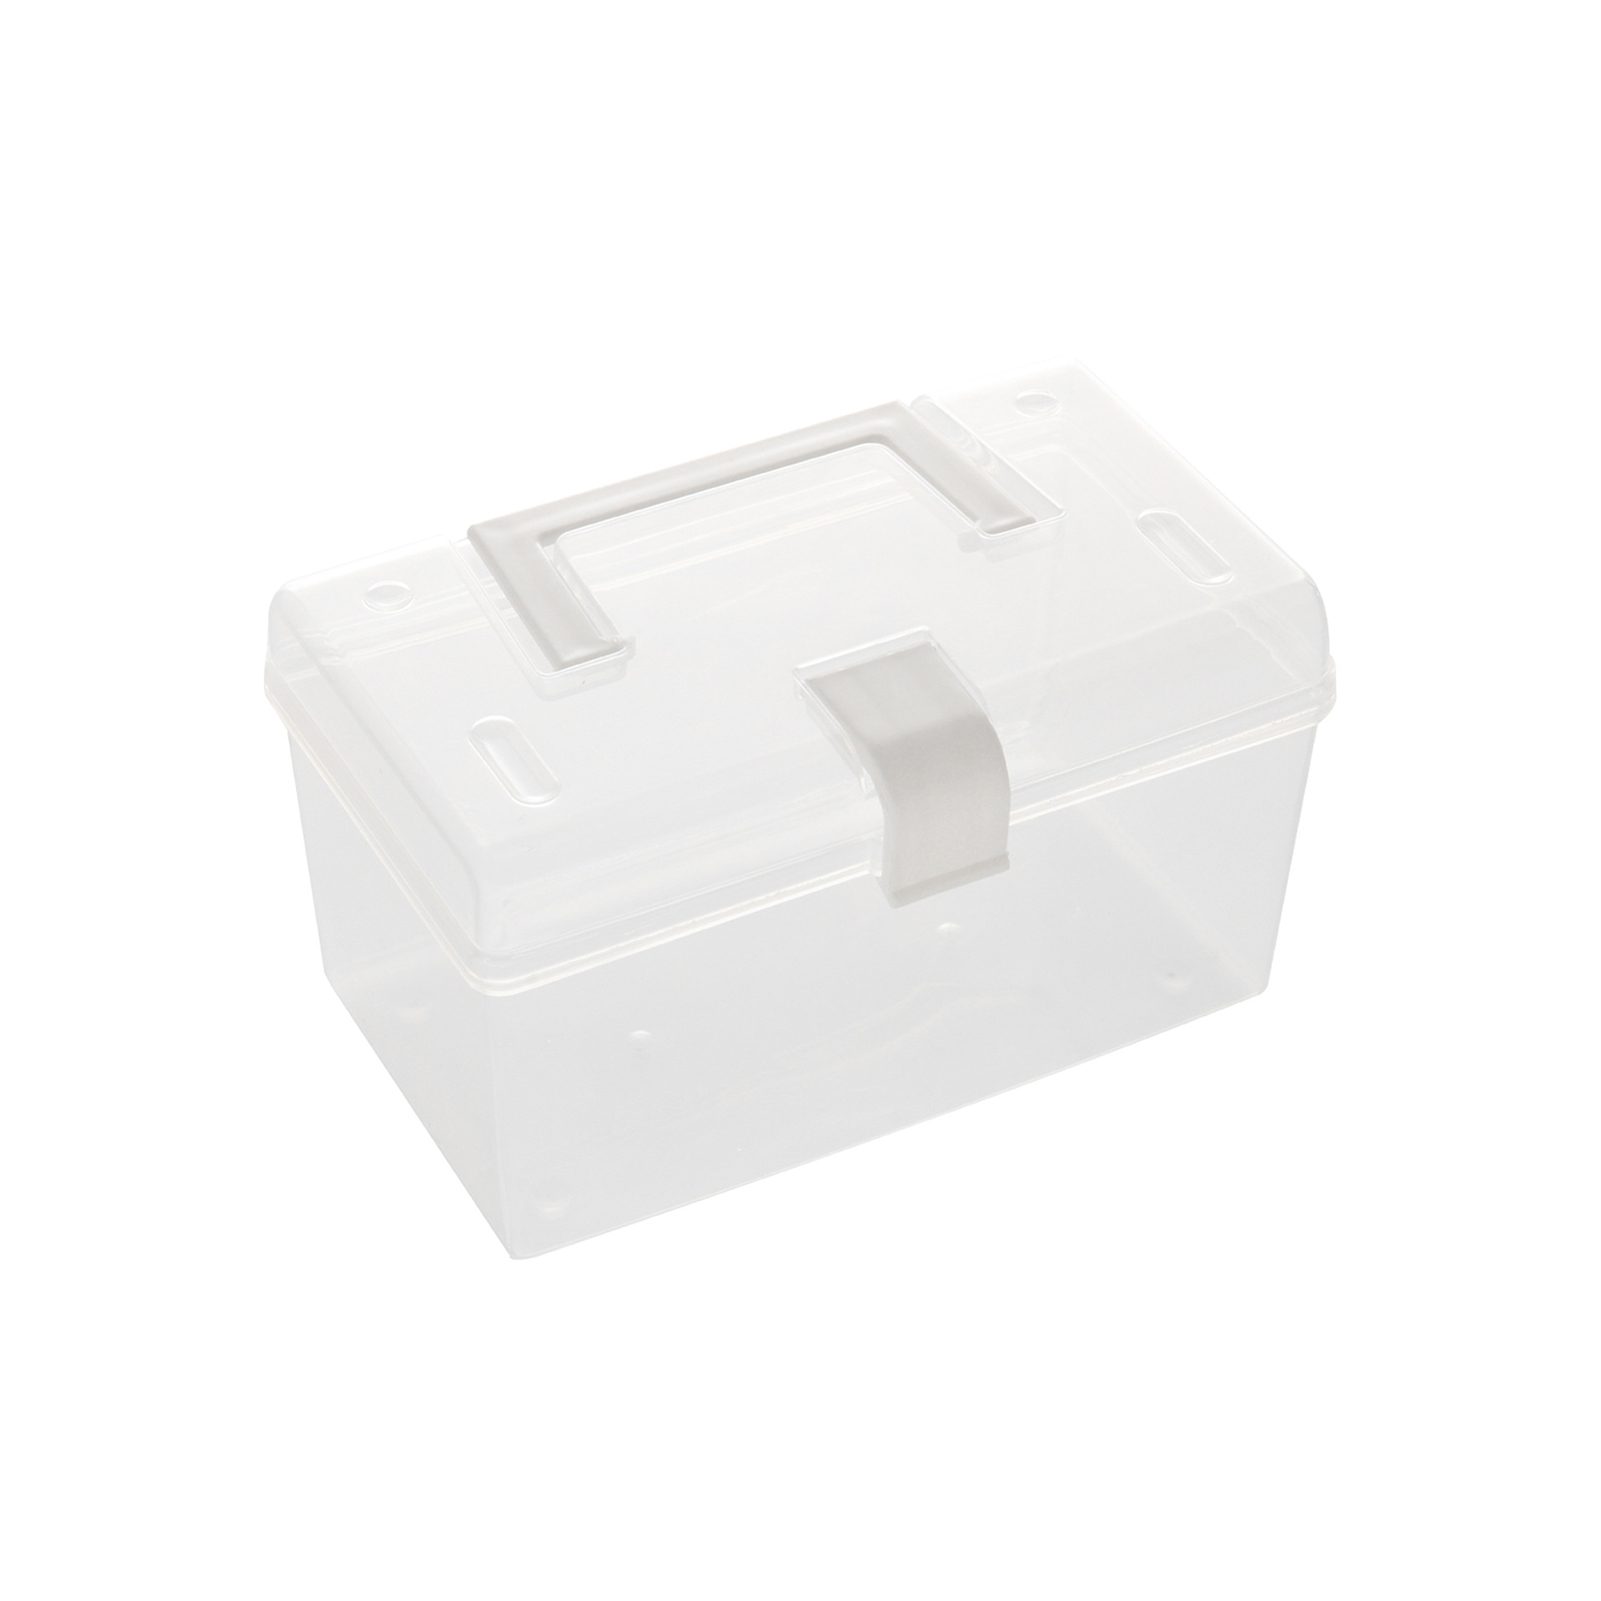 Sundries Box with Hidden Handle All-purpose Face Cover Clear Organizer Box